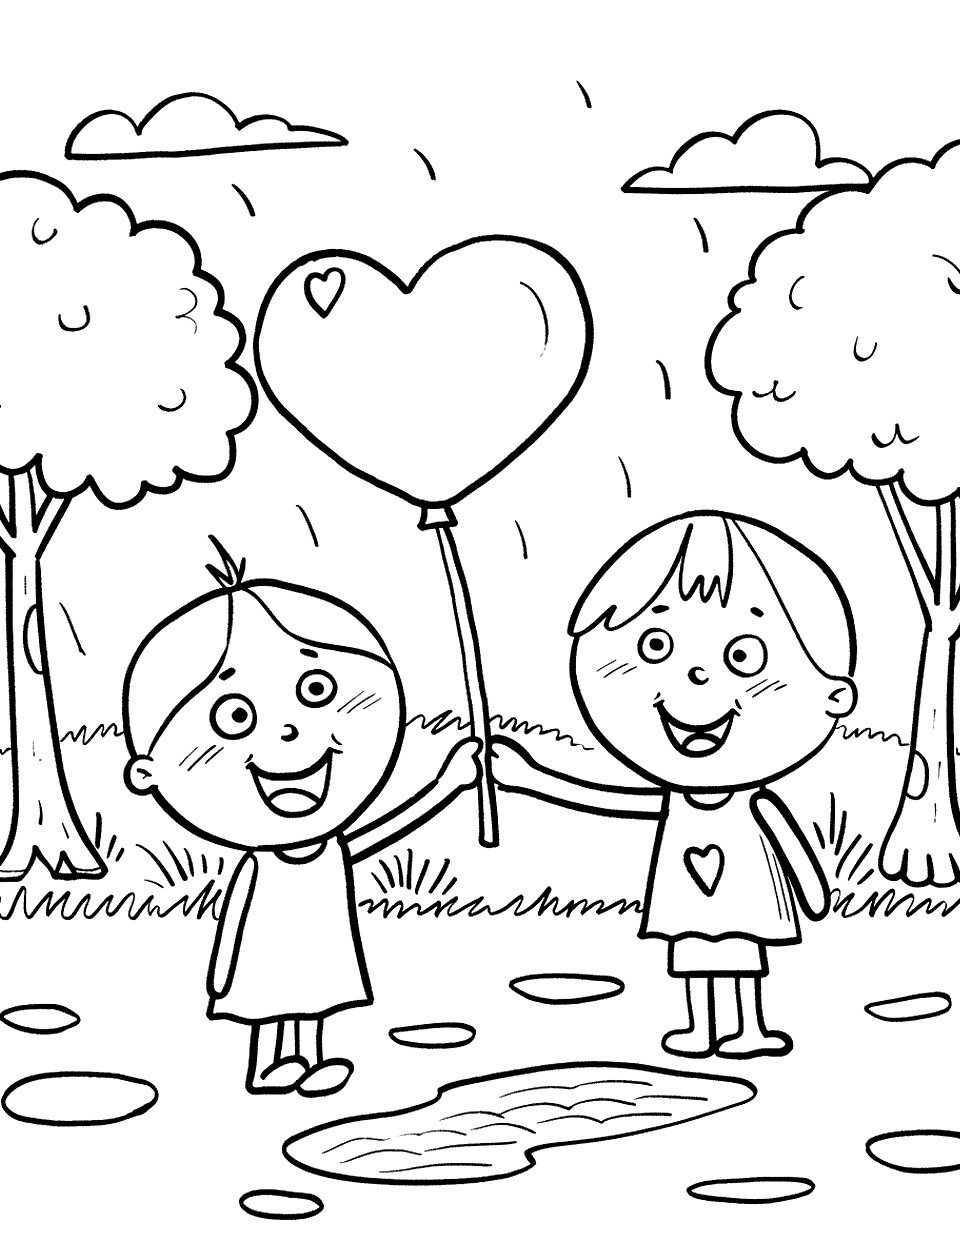 Heart Balloon Festival Shapes Coloring Page - Children holding heart-shaped balloons in a park, with trees and a mini pond.